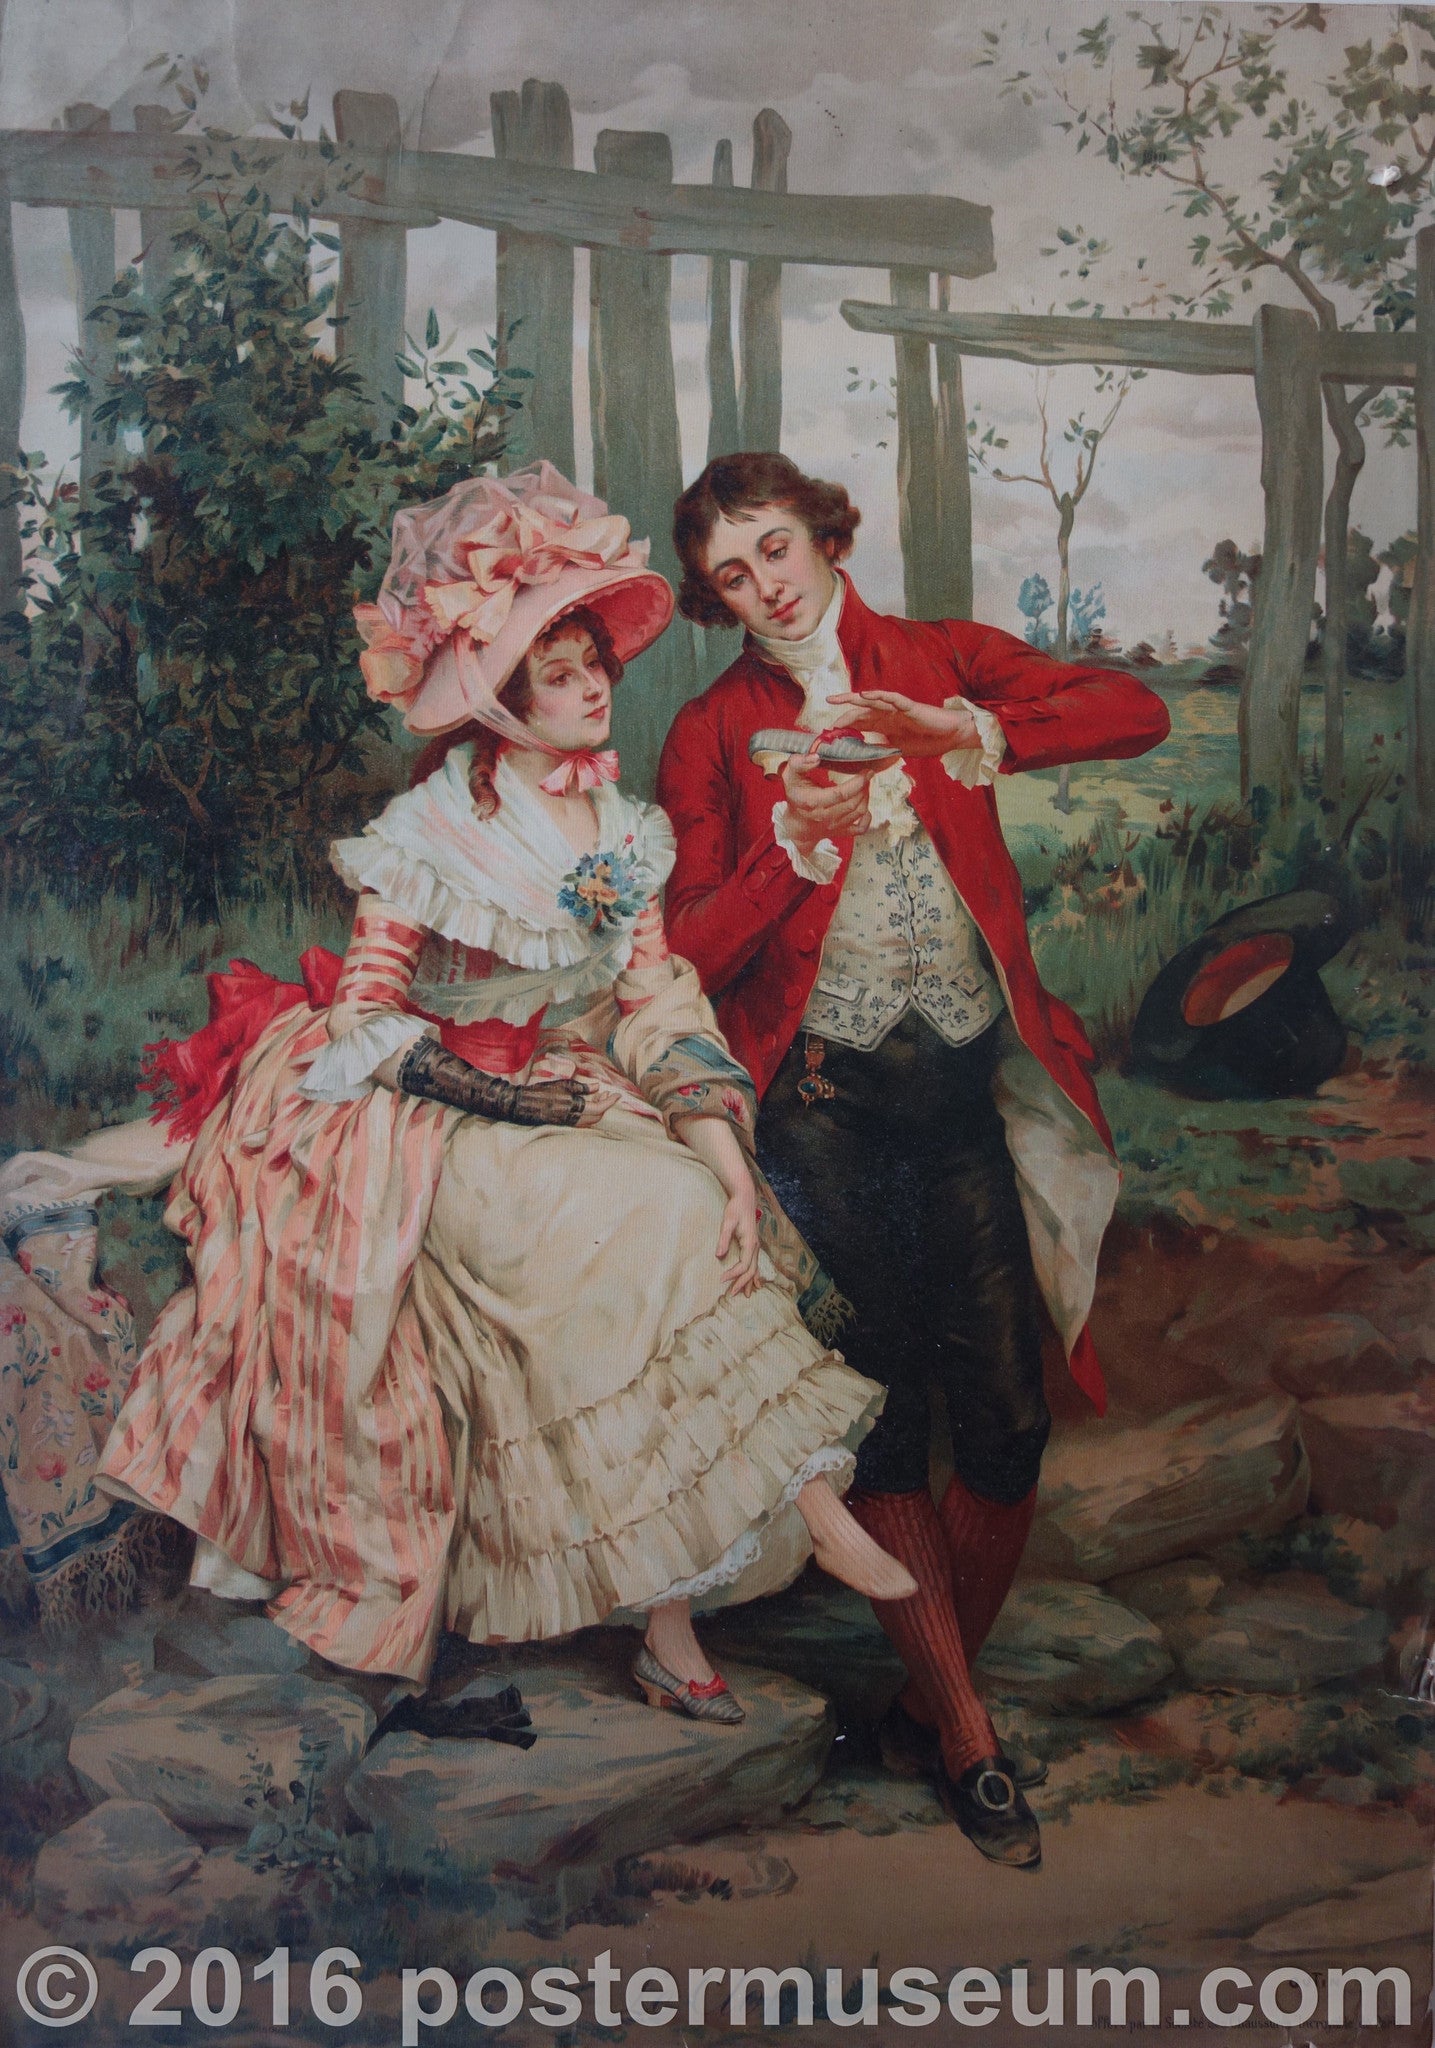 Man playing with Woman's Shoe